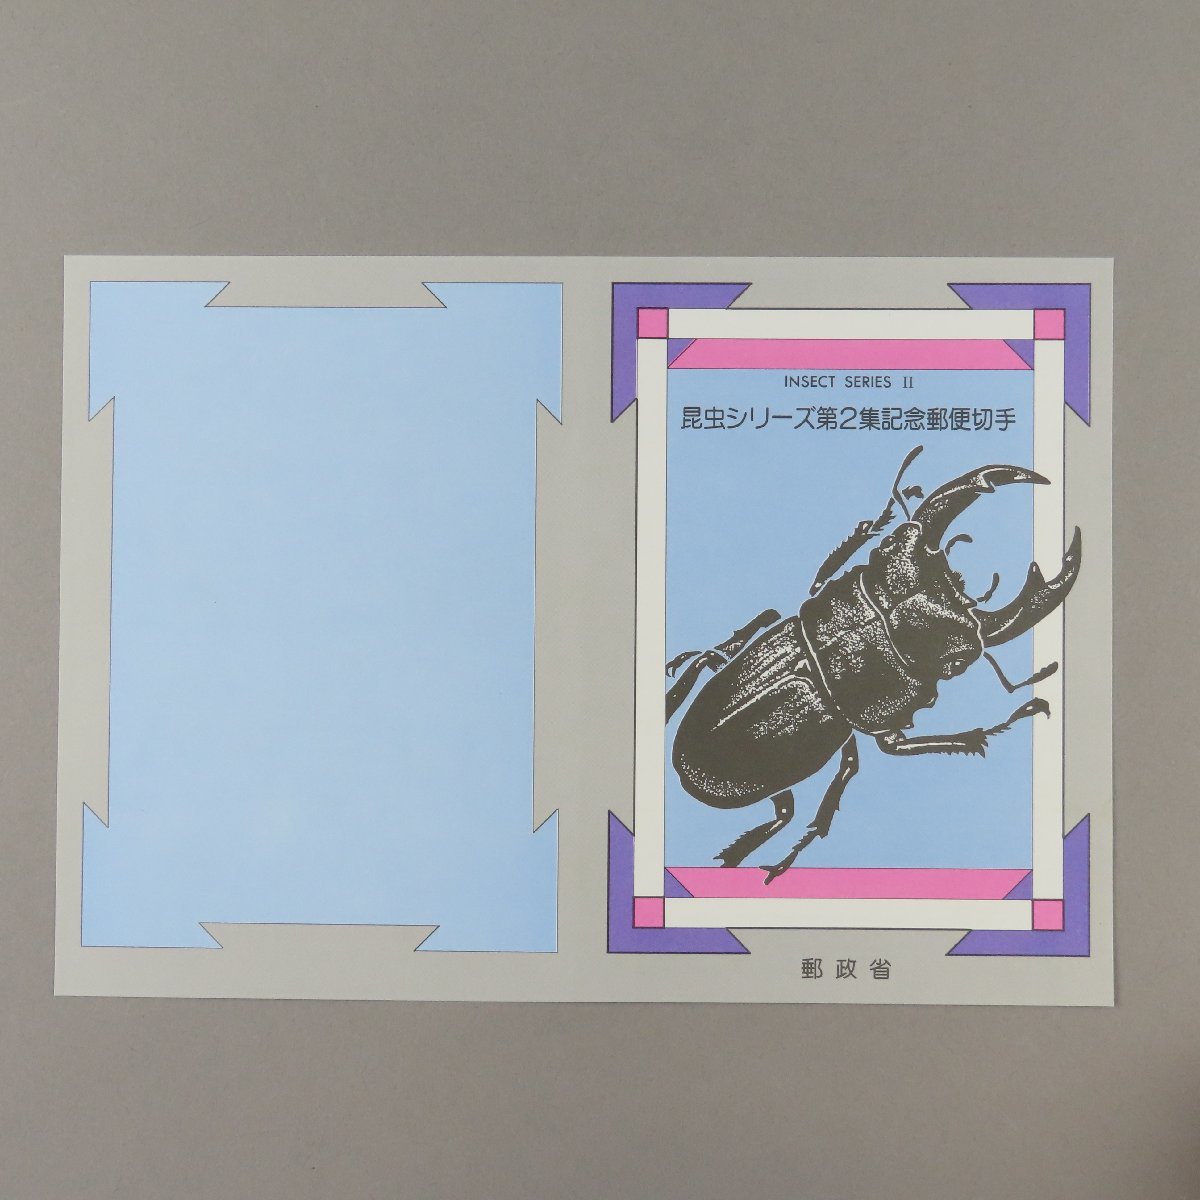 [ stamp 0934] insect series no. 2 compilation oo stag beetle * drill sima green corbicula / Miyama red ne*ma Imai Cub li60 jpy 20 surface 2 seat postal . instructions attaching 